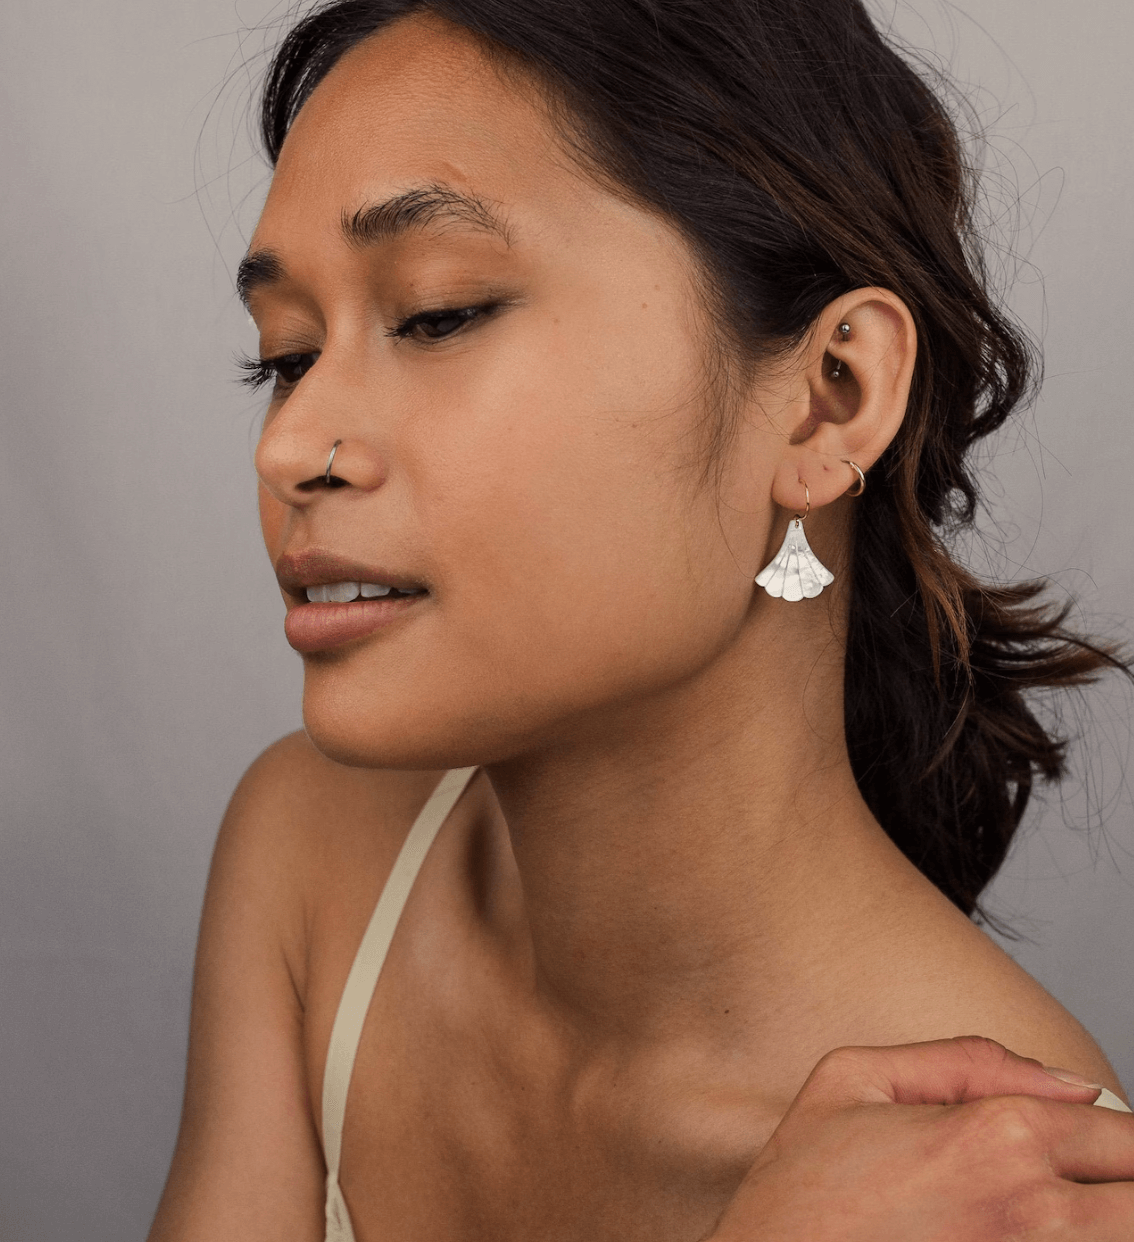 What is minimalism in jewelry?